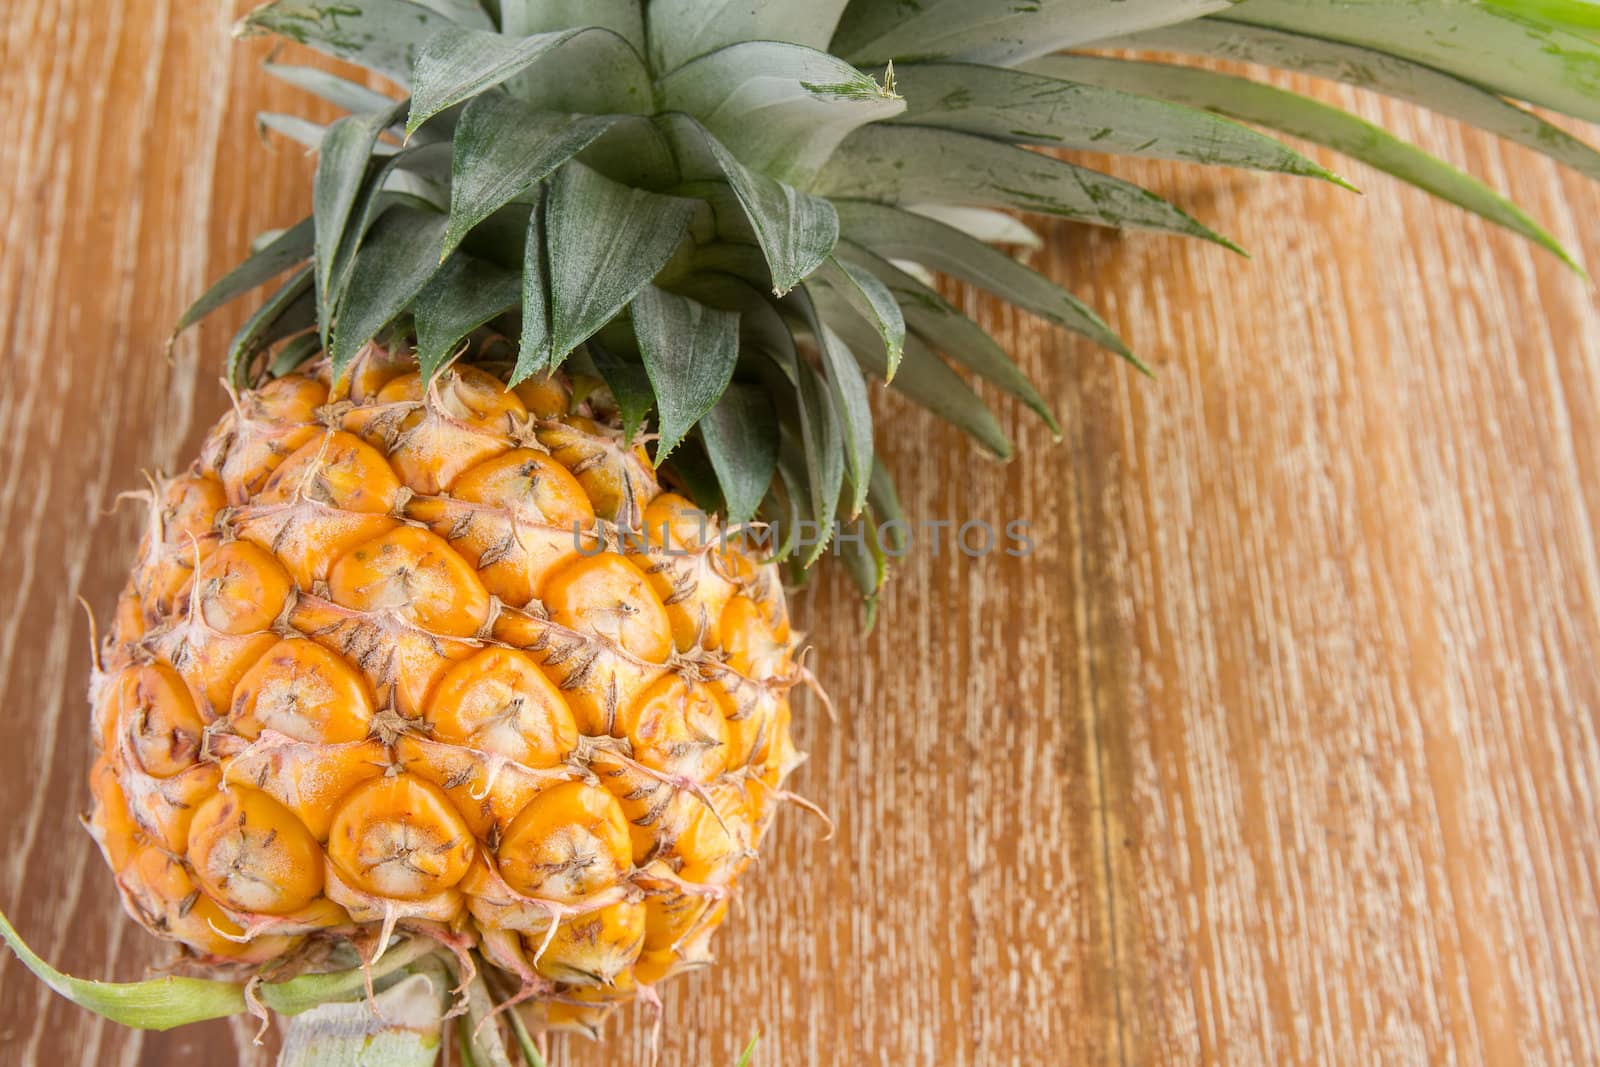 Pineapple on wood table background